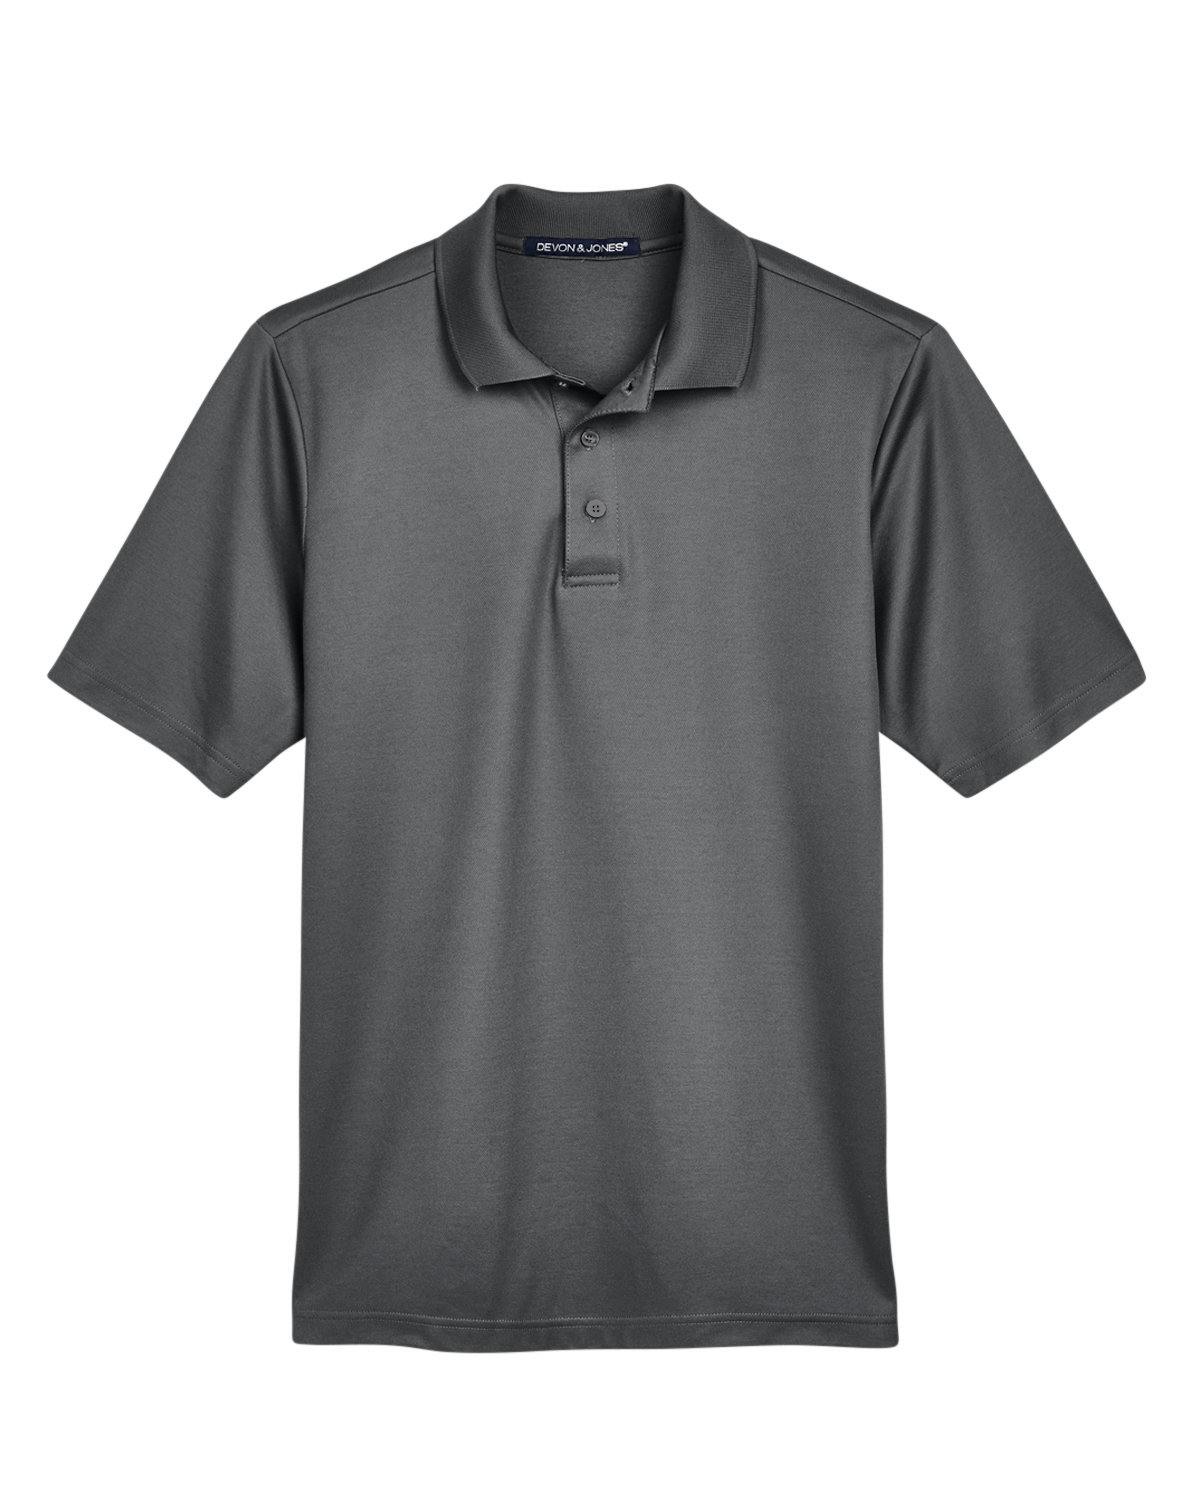 Image for CrownLux Performance® Men's Plaited Polo